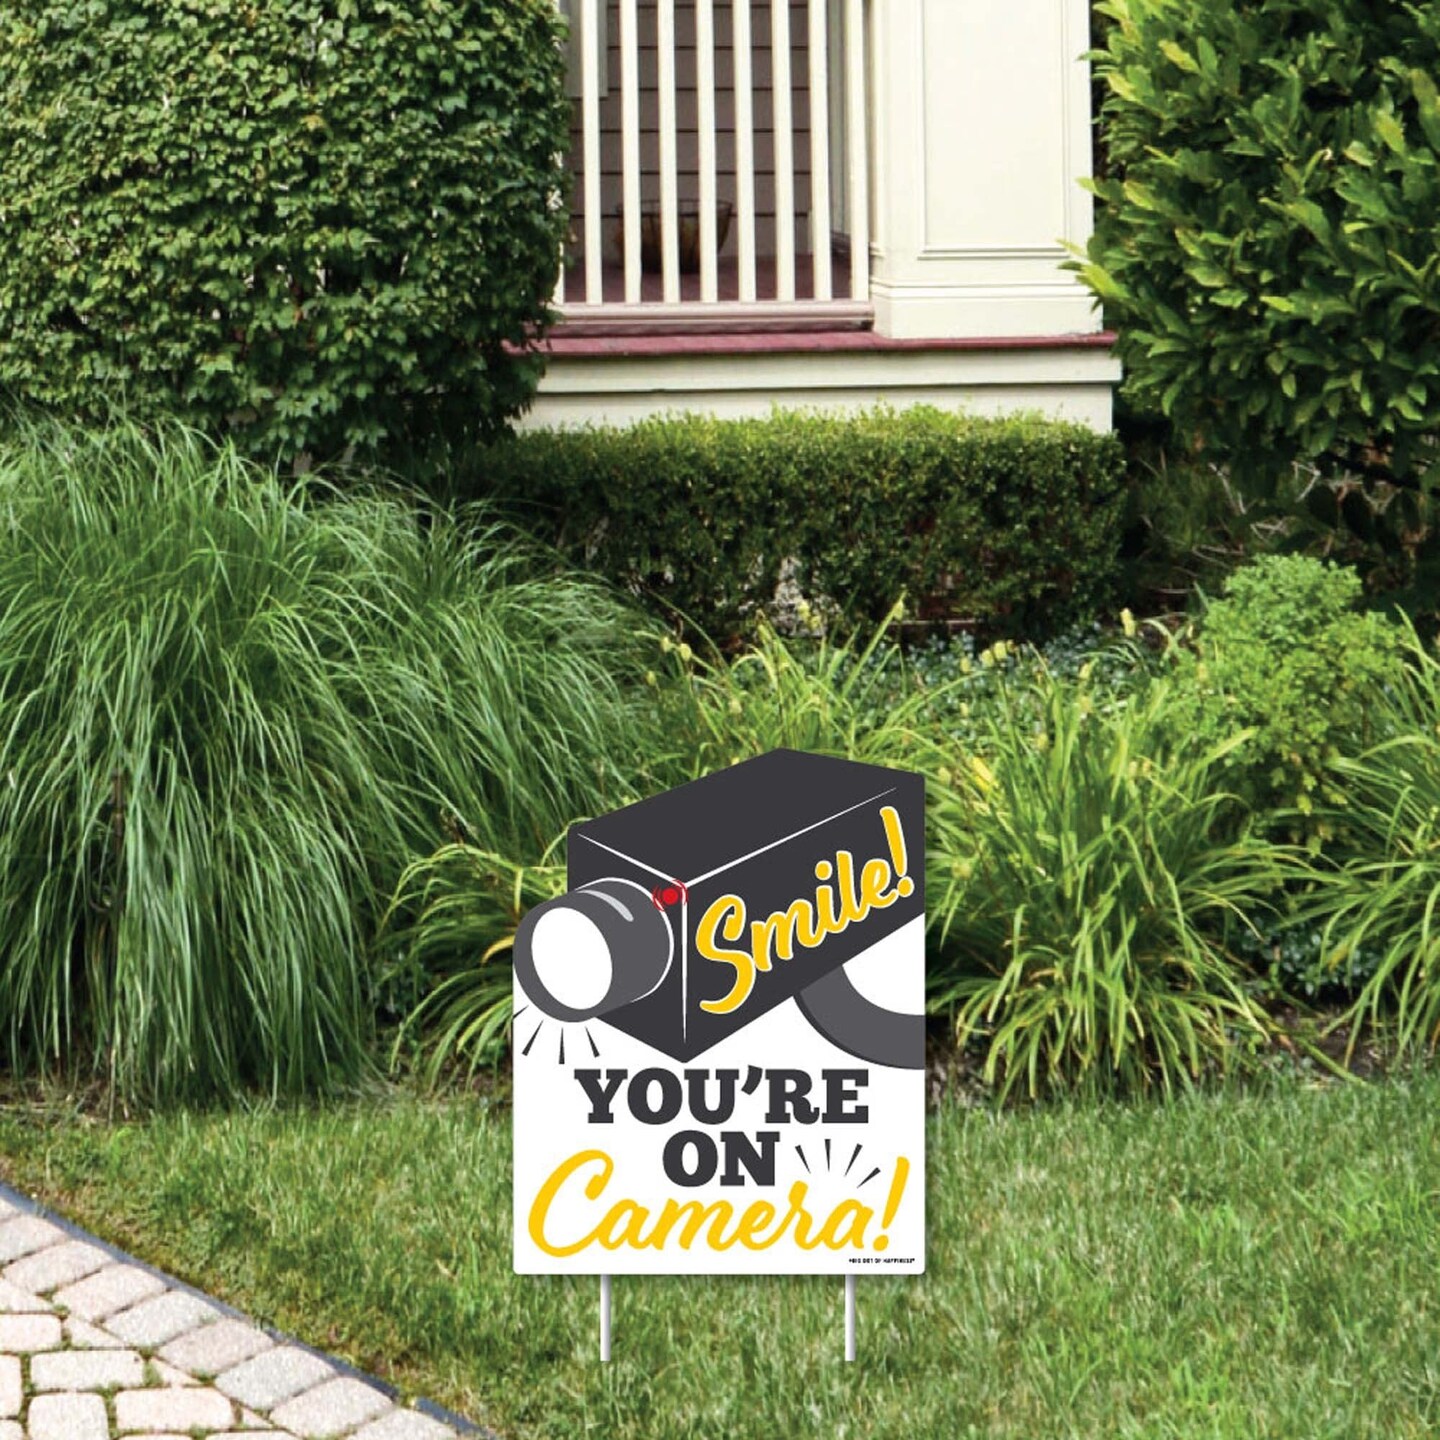 Big Dot of Happiness Home Security Camera Sign - Outdoor Lawn Sign - Security System Yard Sign - 1 Piece